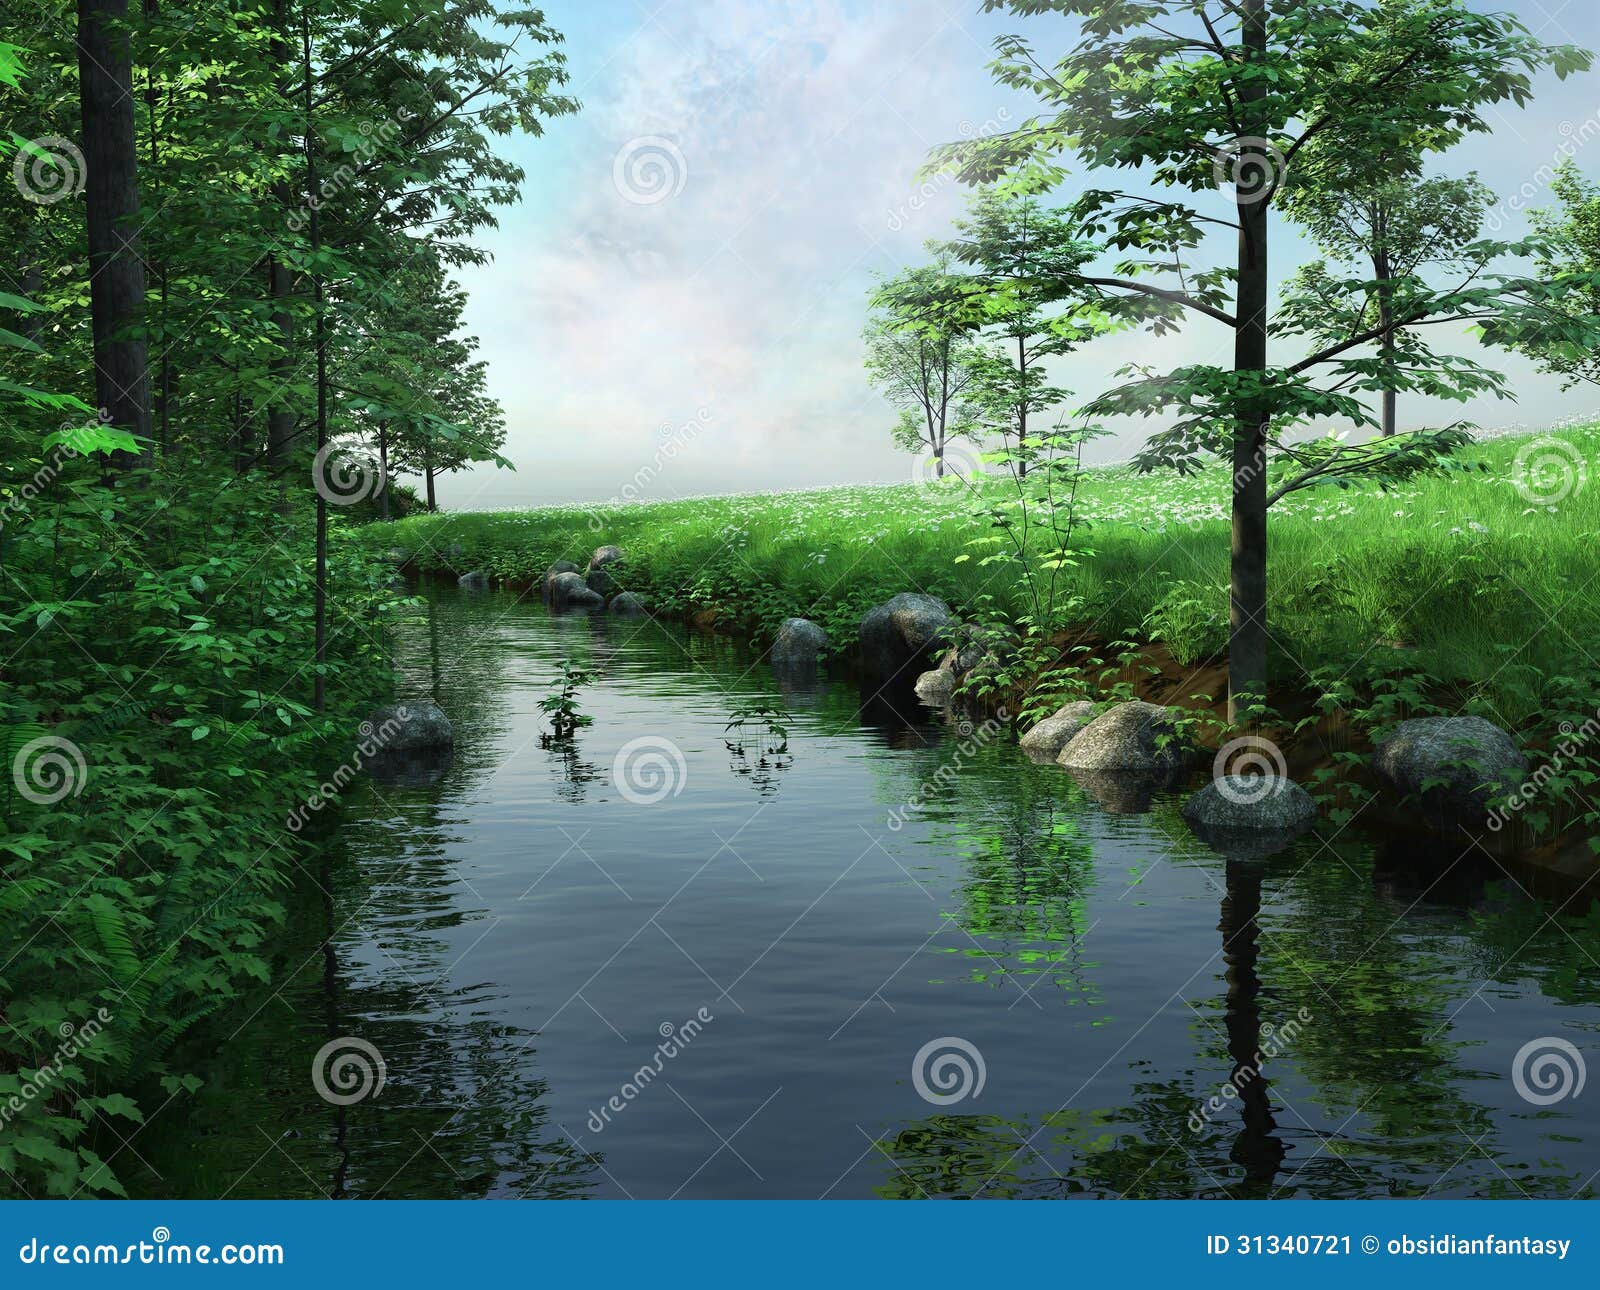 green meadow and river